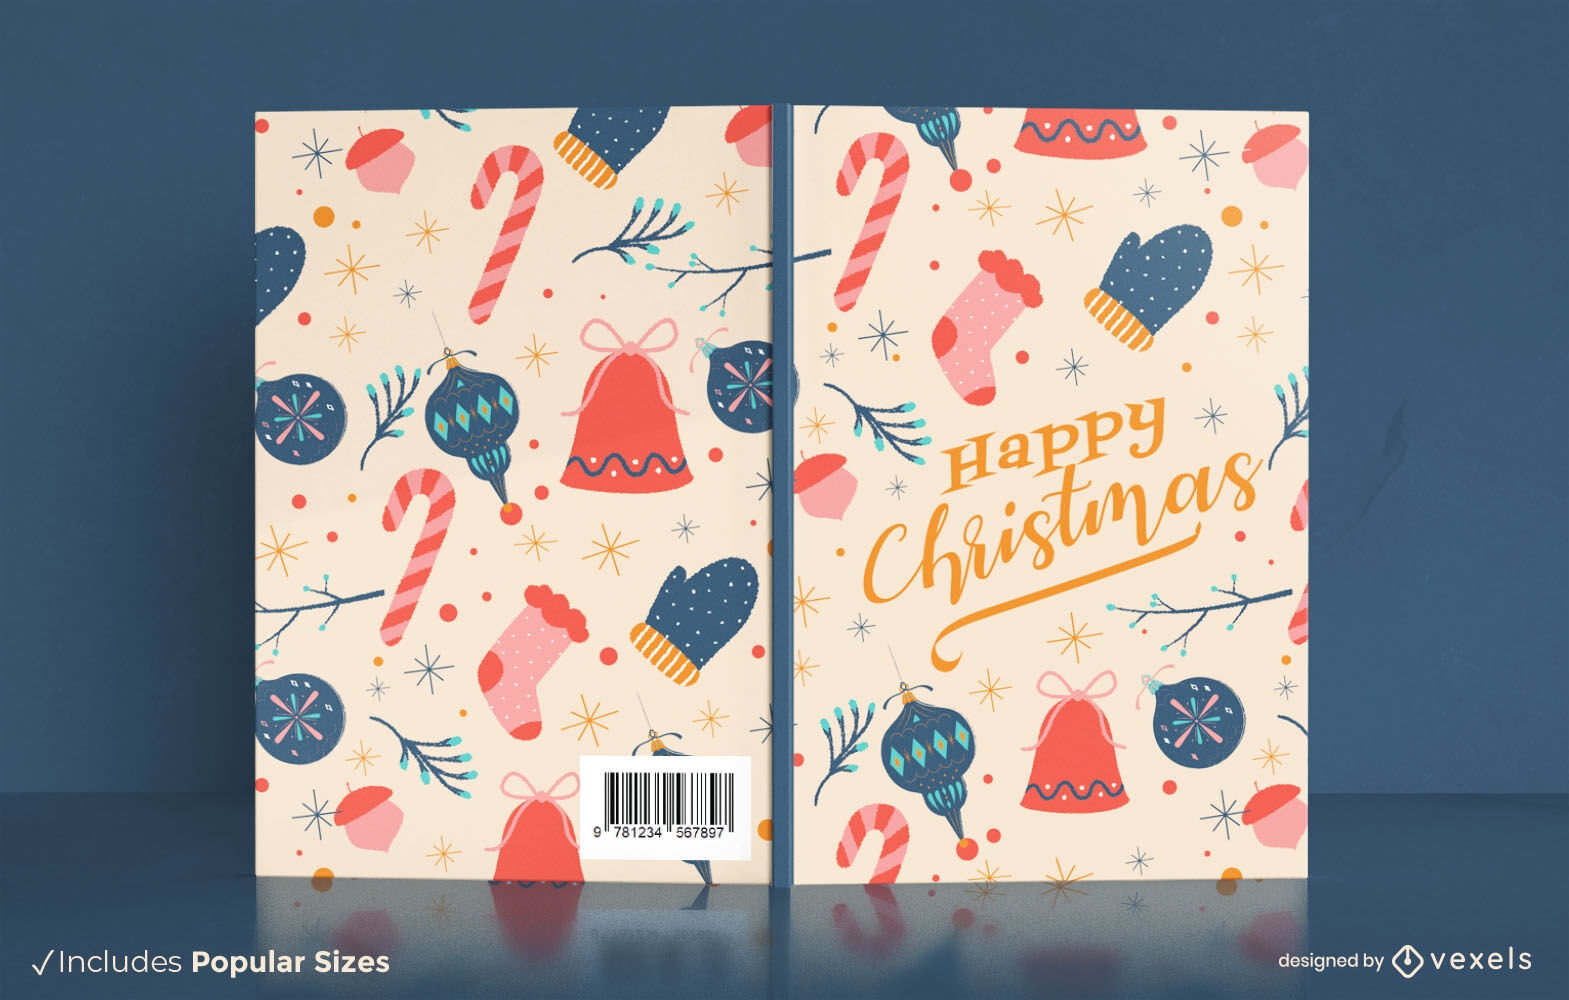 Happy Christmas Journal Book Cover Design